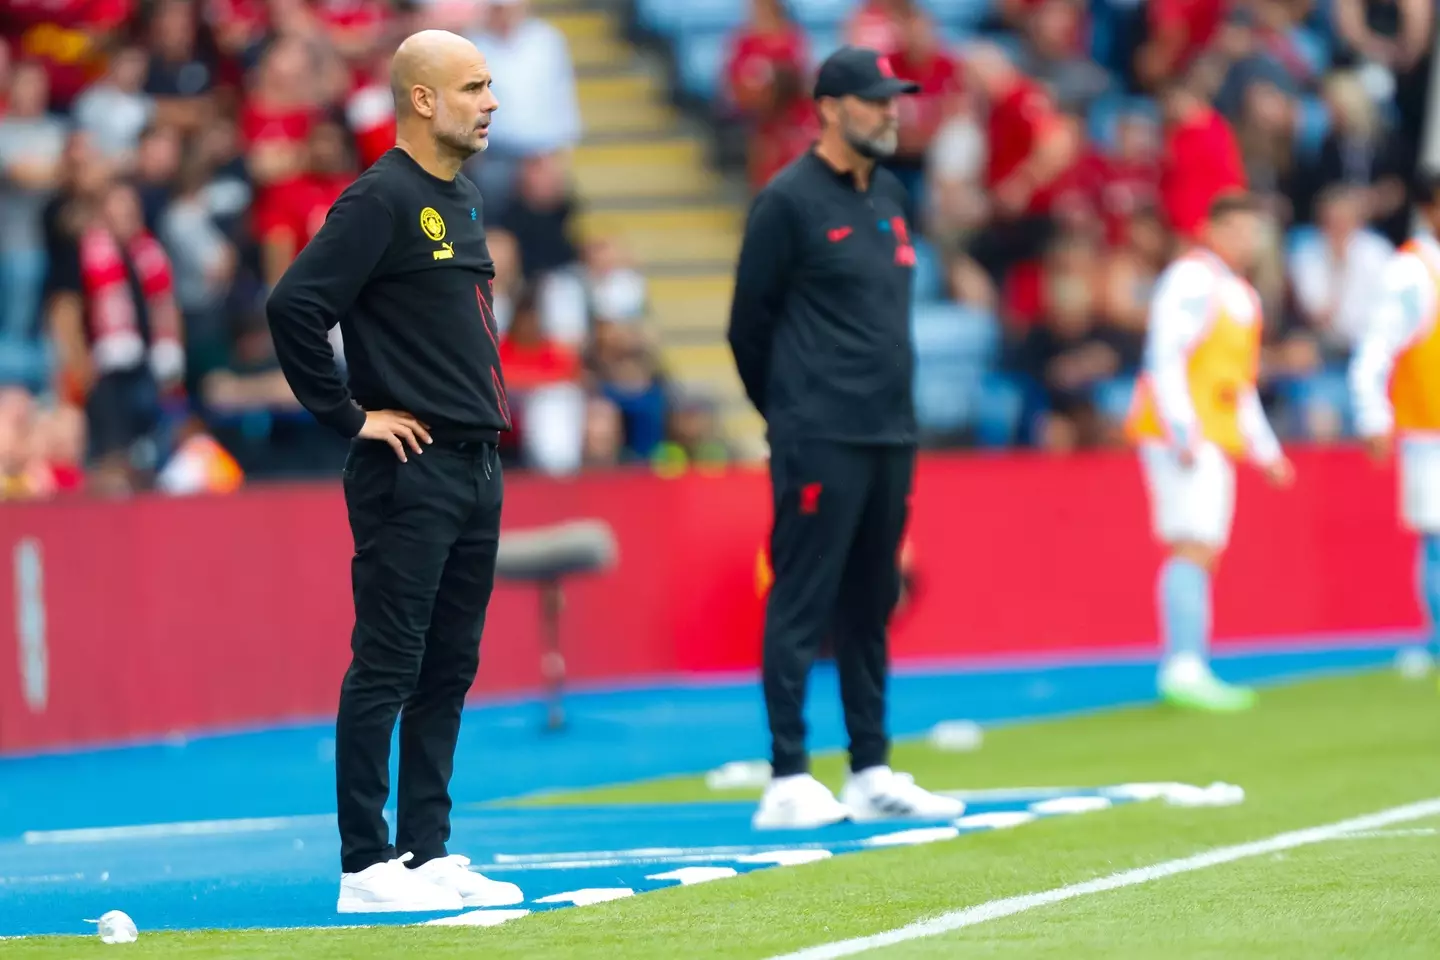 Guardiola and Klopp earlier this year. (Image